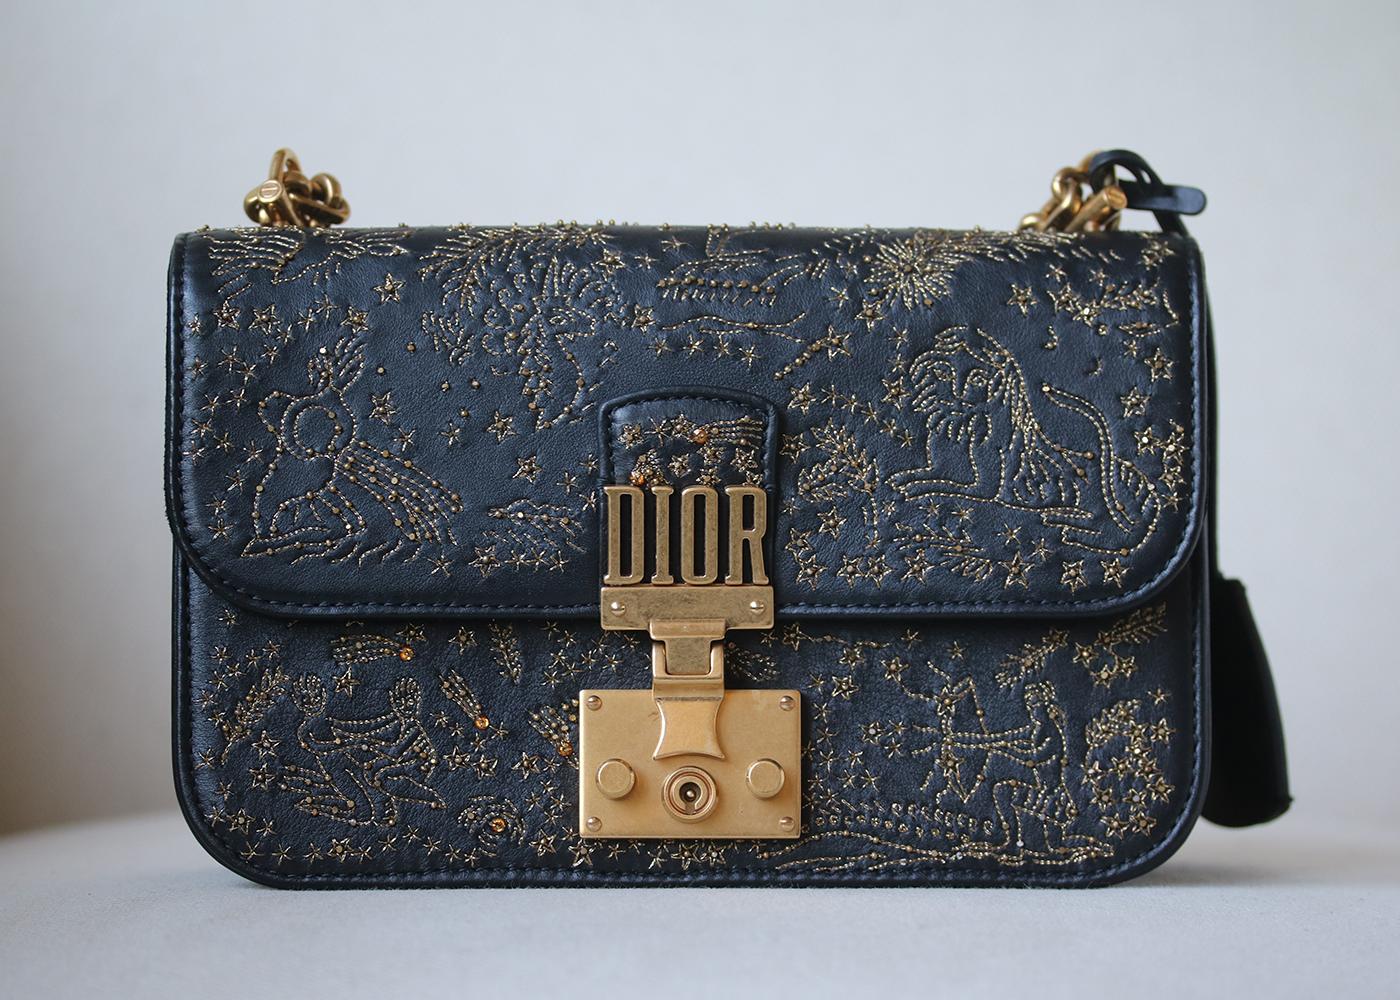 Dioraddict flap bag in black smooth calfskin, embroidered with threads and sequins depicting the signs of the zodiac. Cannage topstitching. Signature clasp. Detachable chain. Jewellery in aged gold-tone metal. Carried on the shoulder or across the